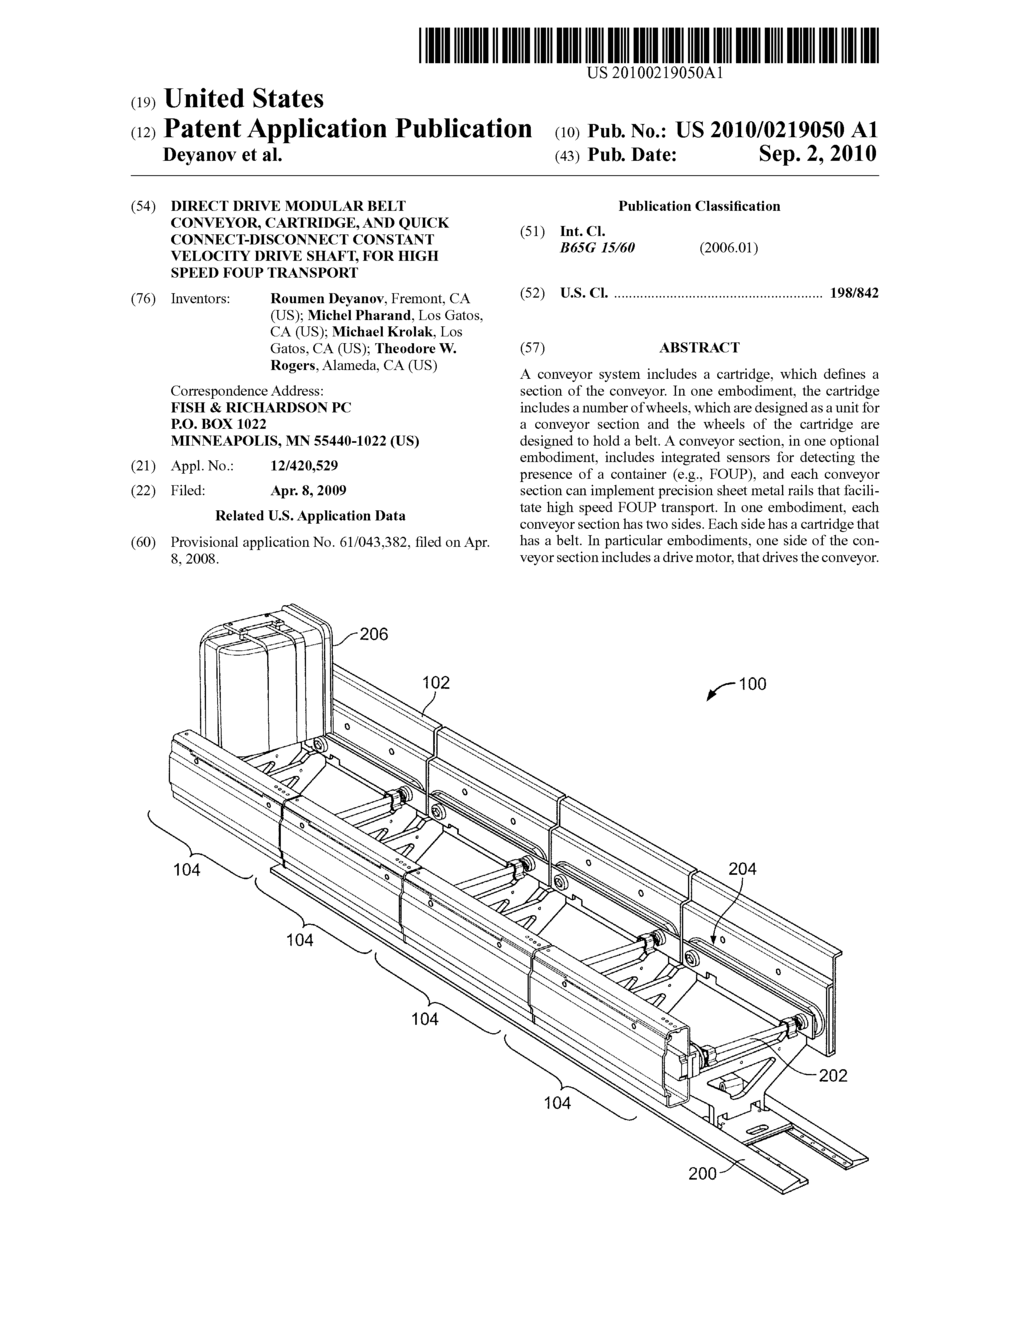 DIRECT DRIVE MODULAR BELT CONVEYOR, CARTRIDGE, AND QUICK CONNECT-DISCONNECT CONSTANT VELOCITY DRIVE SHAFT, FOR HIGH SPEED FOUP TRANSPORT - diagram, schematic, and image 01